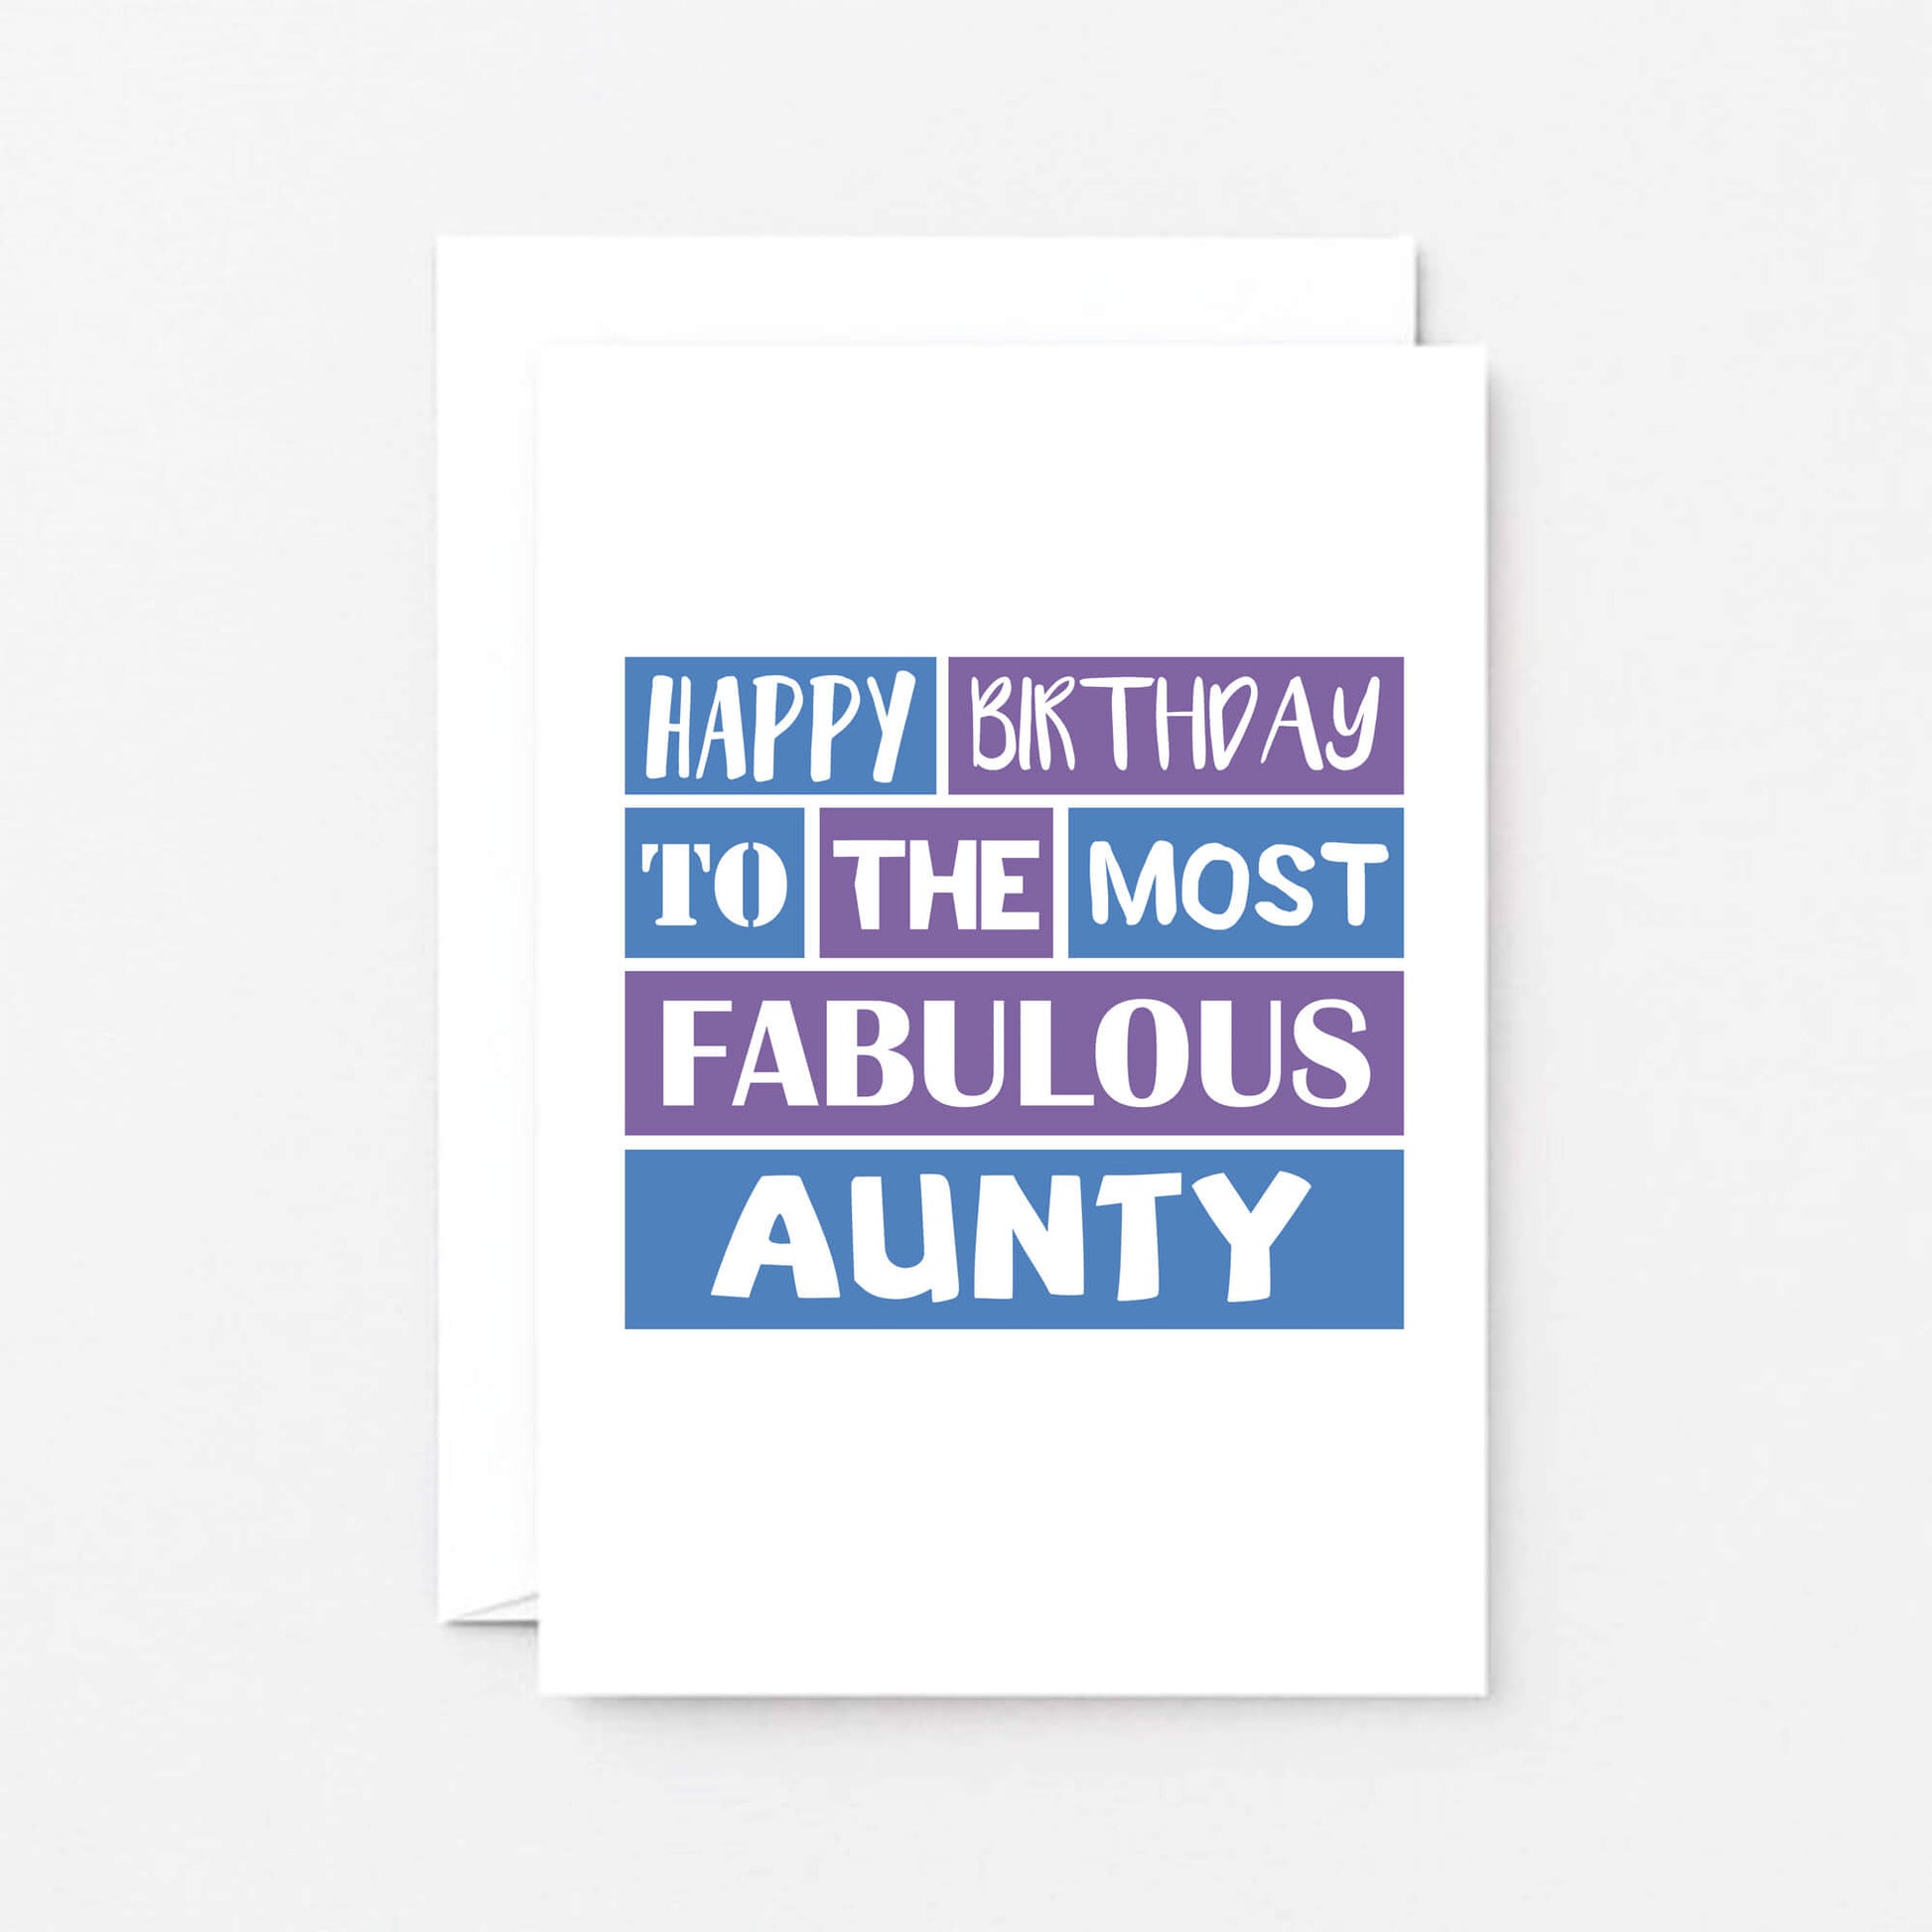 Aunty Birthday Card by SixElevenCreations. Reads by Happy birthday to the most fabulous aunty. Product Code SE0175A6